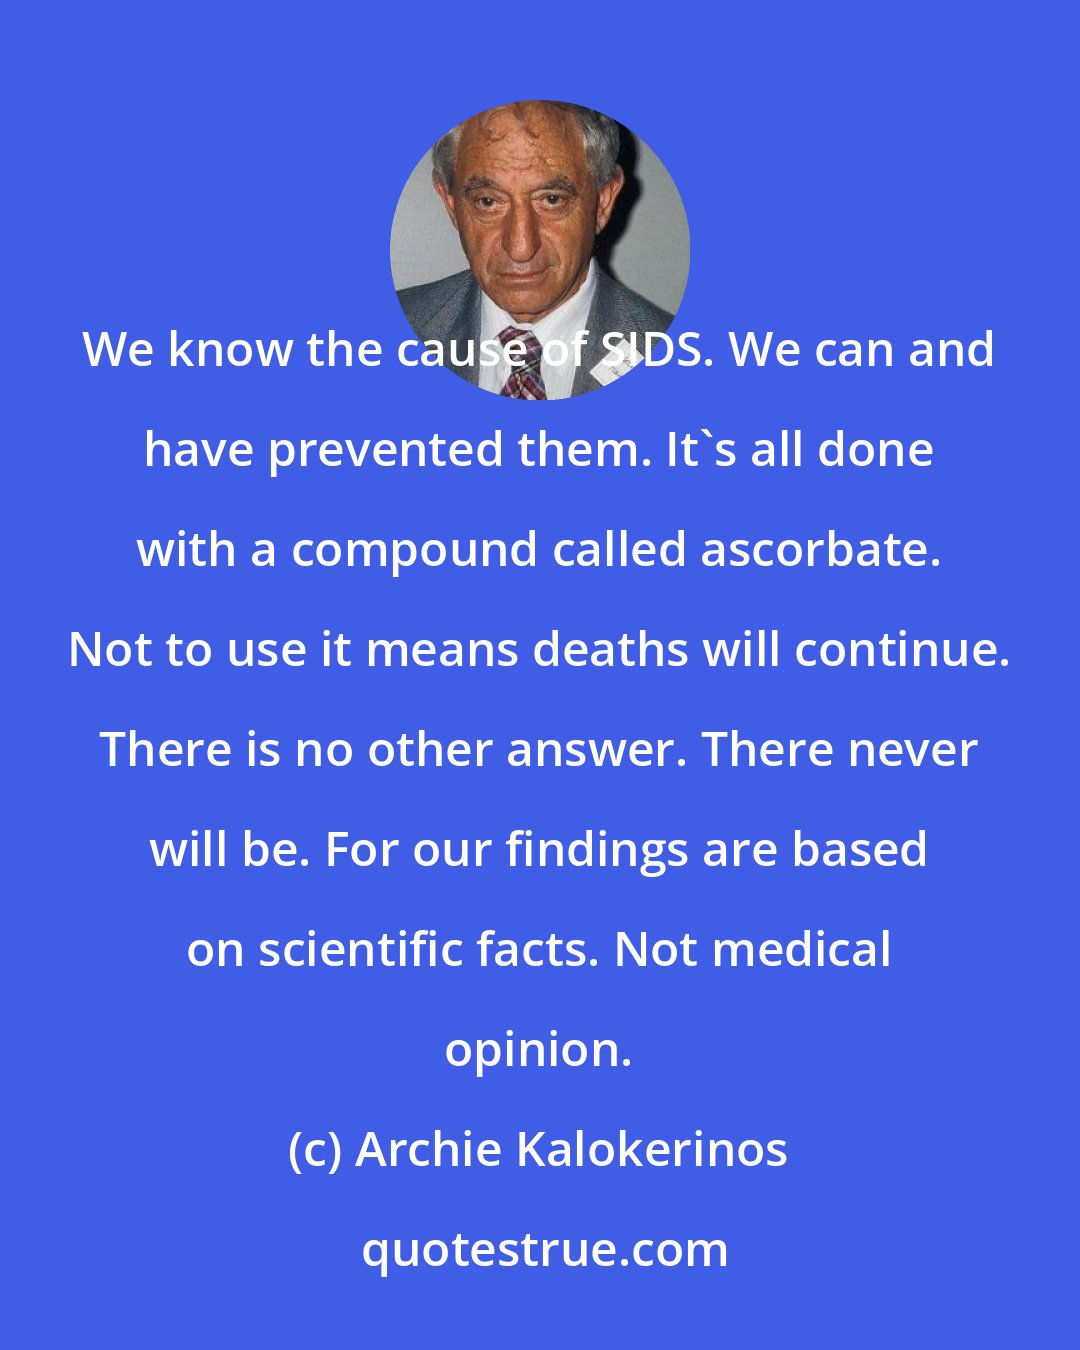 Archie Kalokerinos: We know the cause of SIDS. We can and have prevented them. It's all done with a compound called ascorbate. Not to use it means deaths will continue. There is no other answer. There never will be. For our findings are based on scientific facts. Not medical opinion.